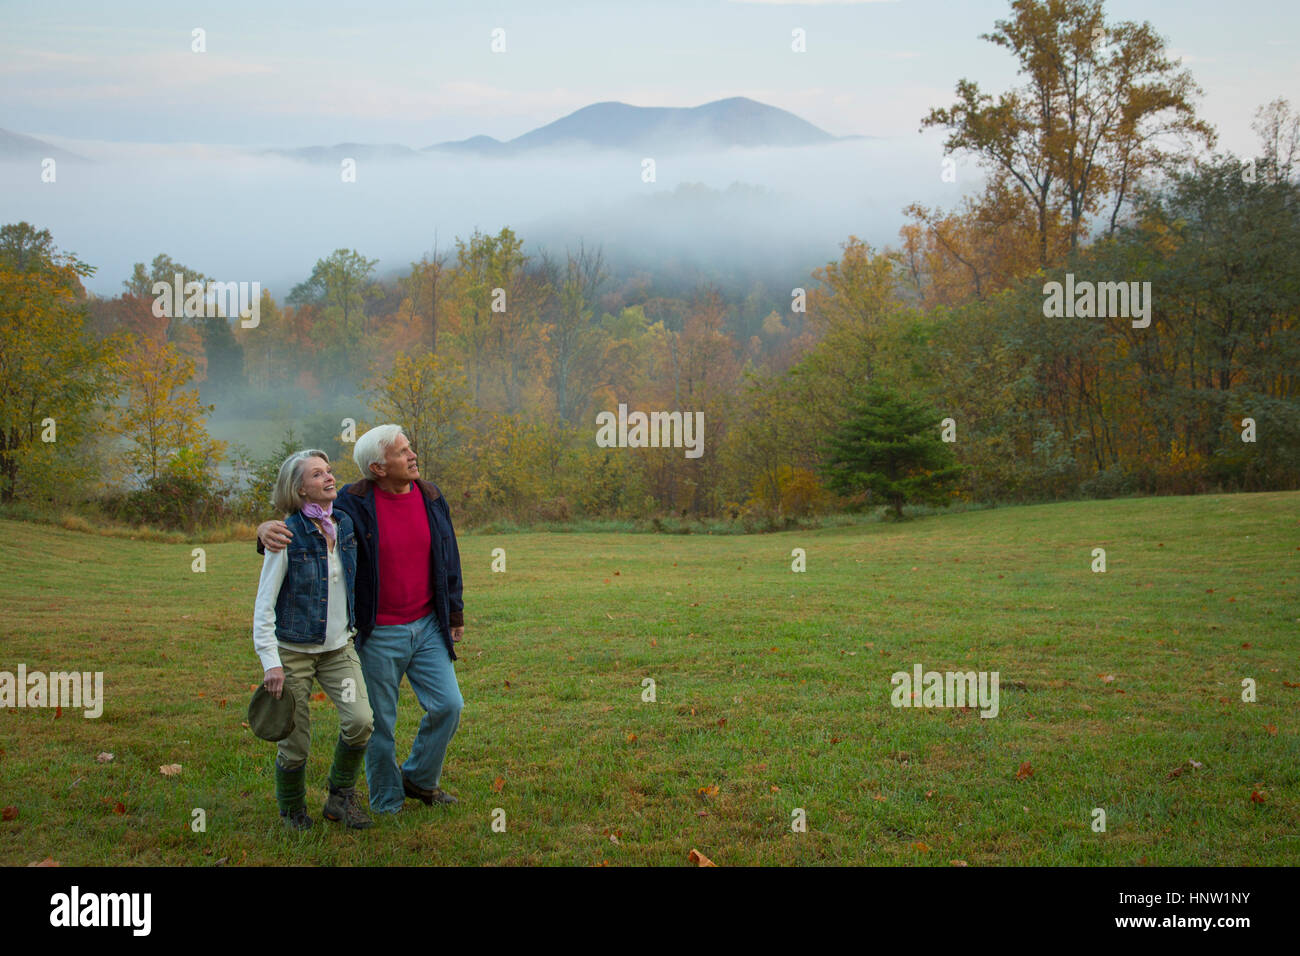 Caucasian couple walking in field Banque D'Images